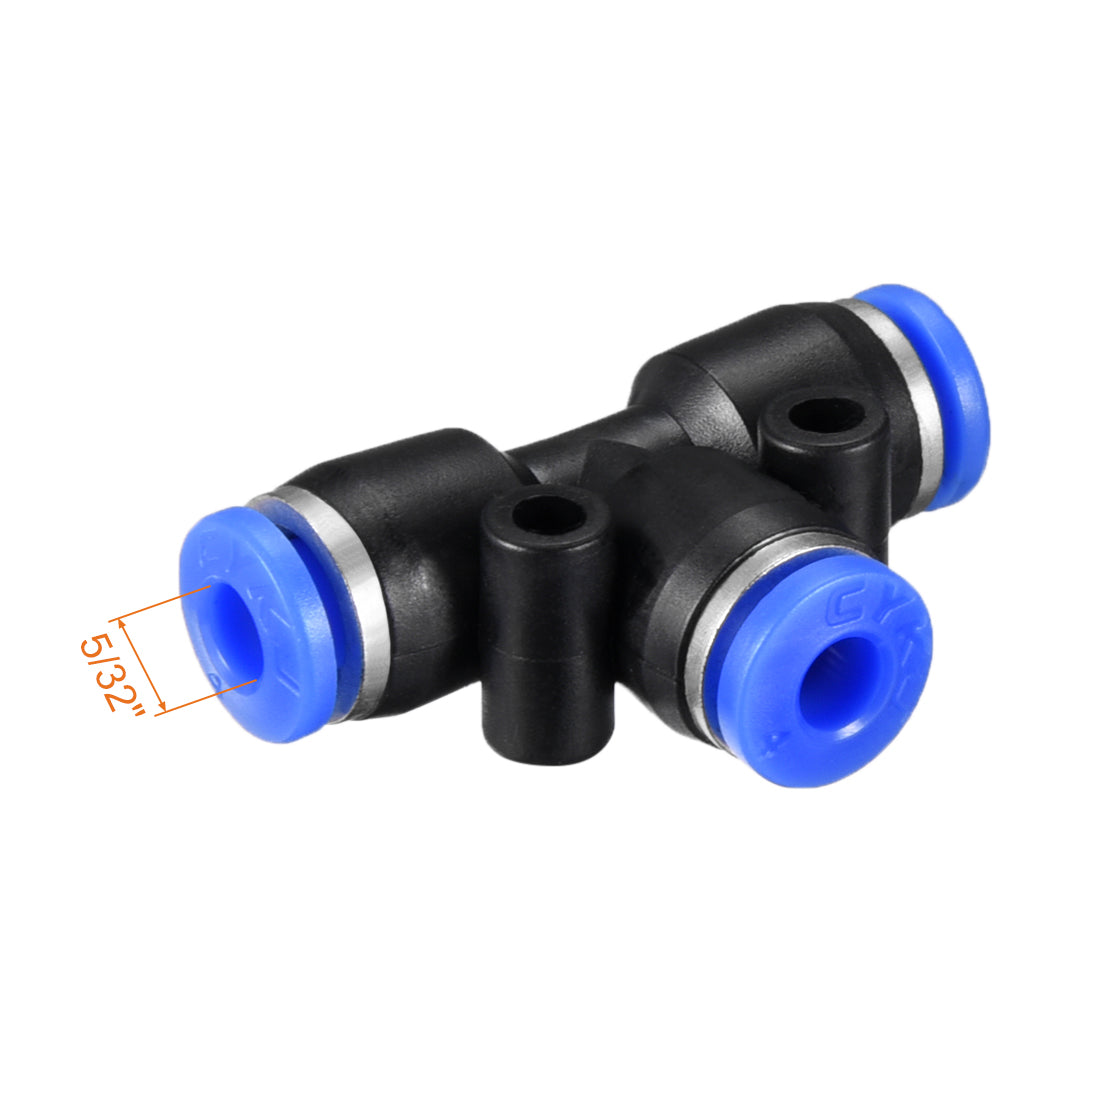 uxcell Uxcell 4pcs Push To Connect Fittings T Type Tube Connect 4mm or 5/32" od Push Fit Fittings Tube Fittings Push Lock Blue  (4mm T tee)